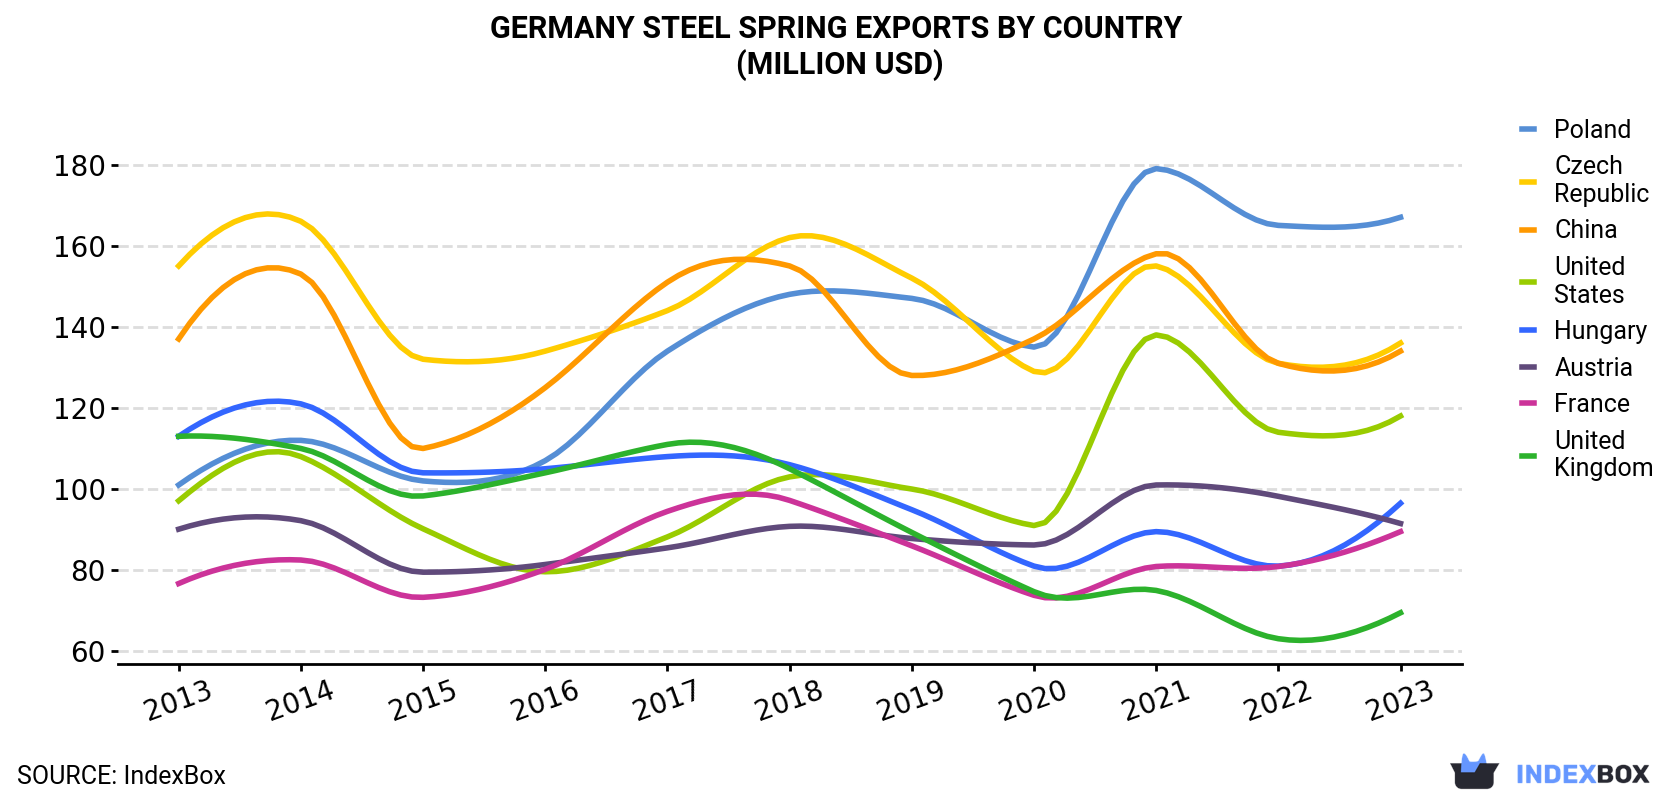 Germany Steel Spring Exports By Country (Million USD)